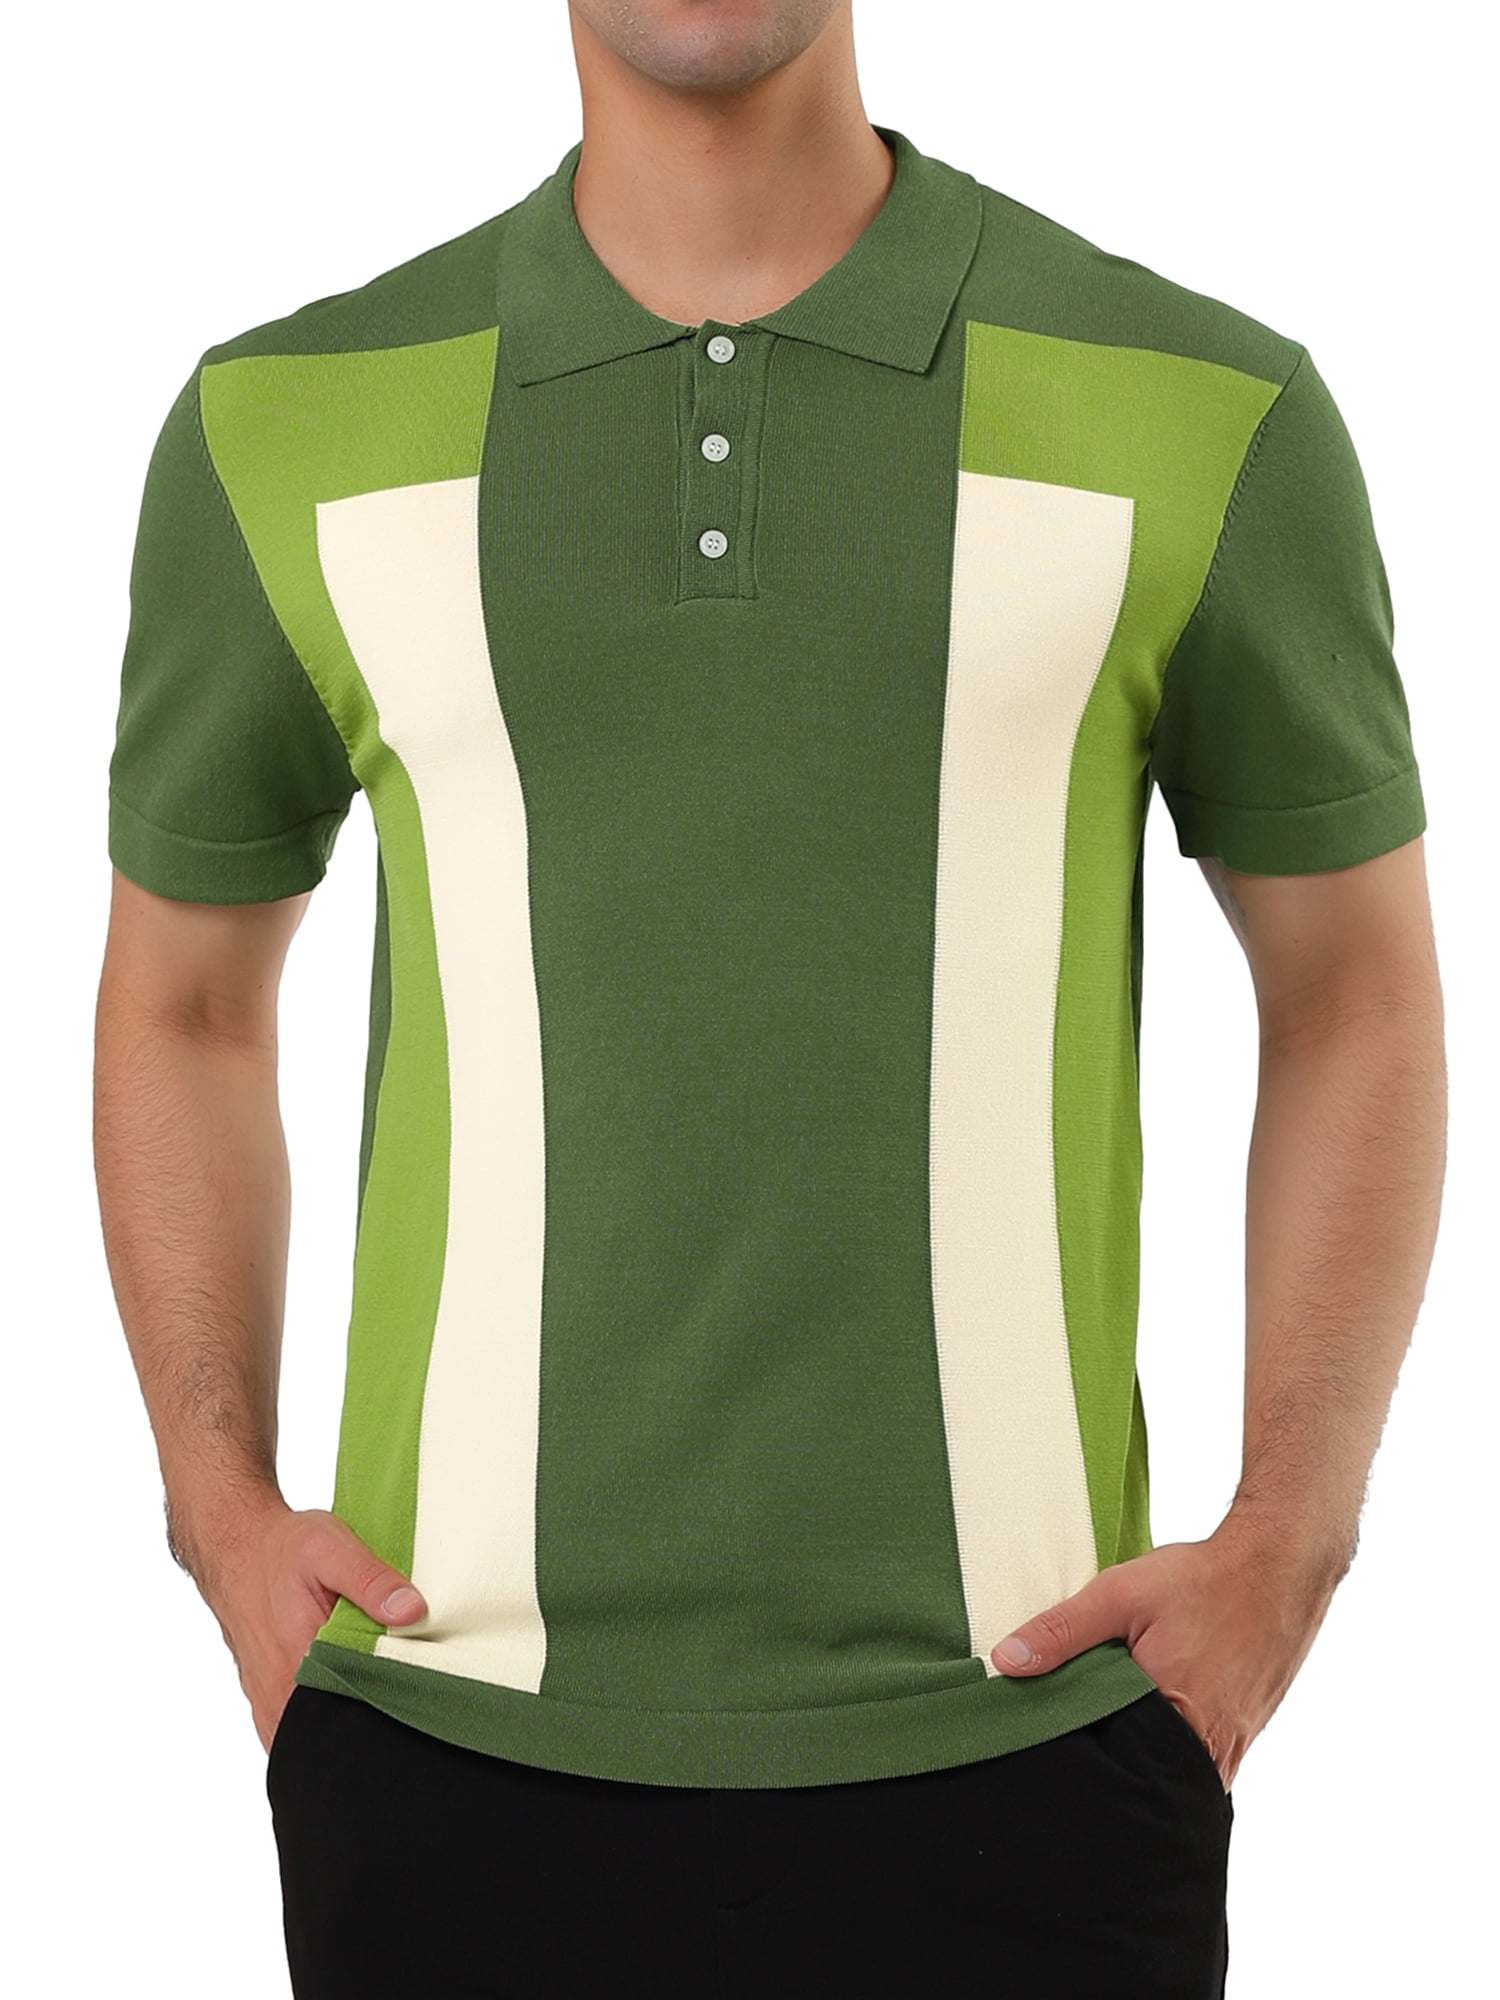 Mens Color Block Relaxed Fit Leisure Short Sleeve T-Shirt Polo Shirt